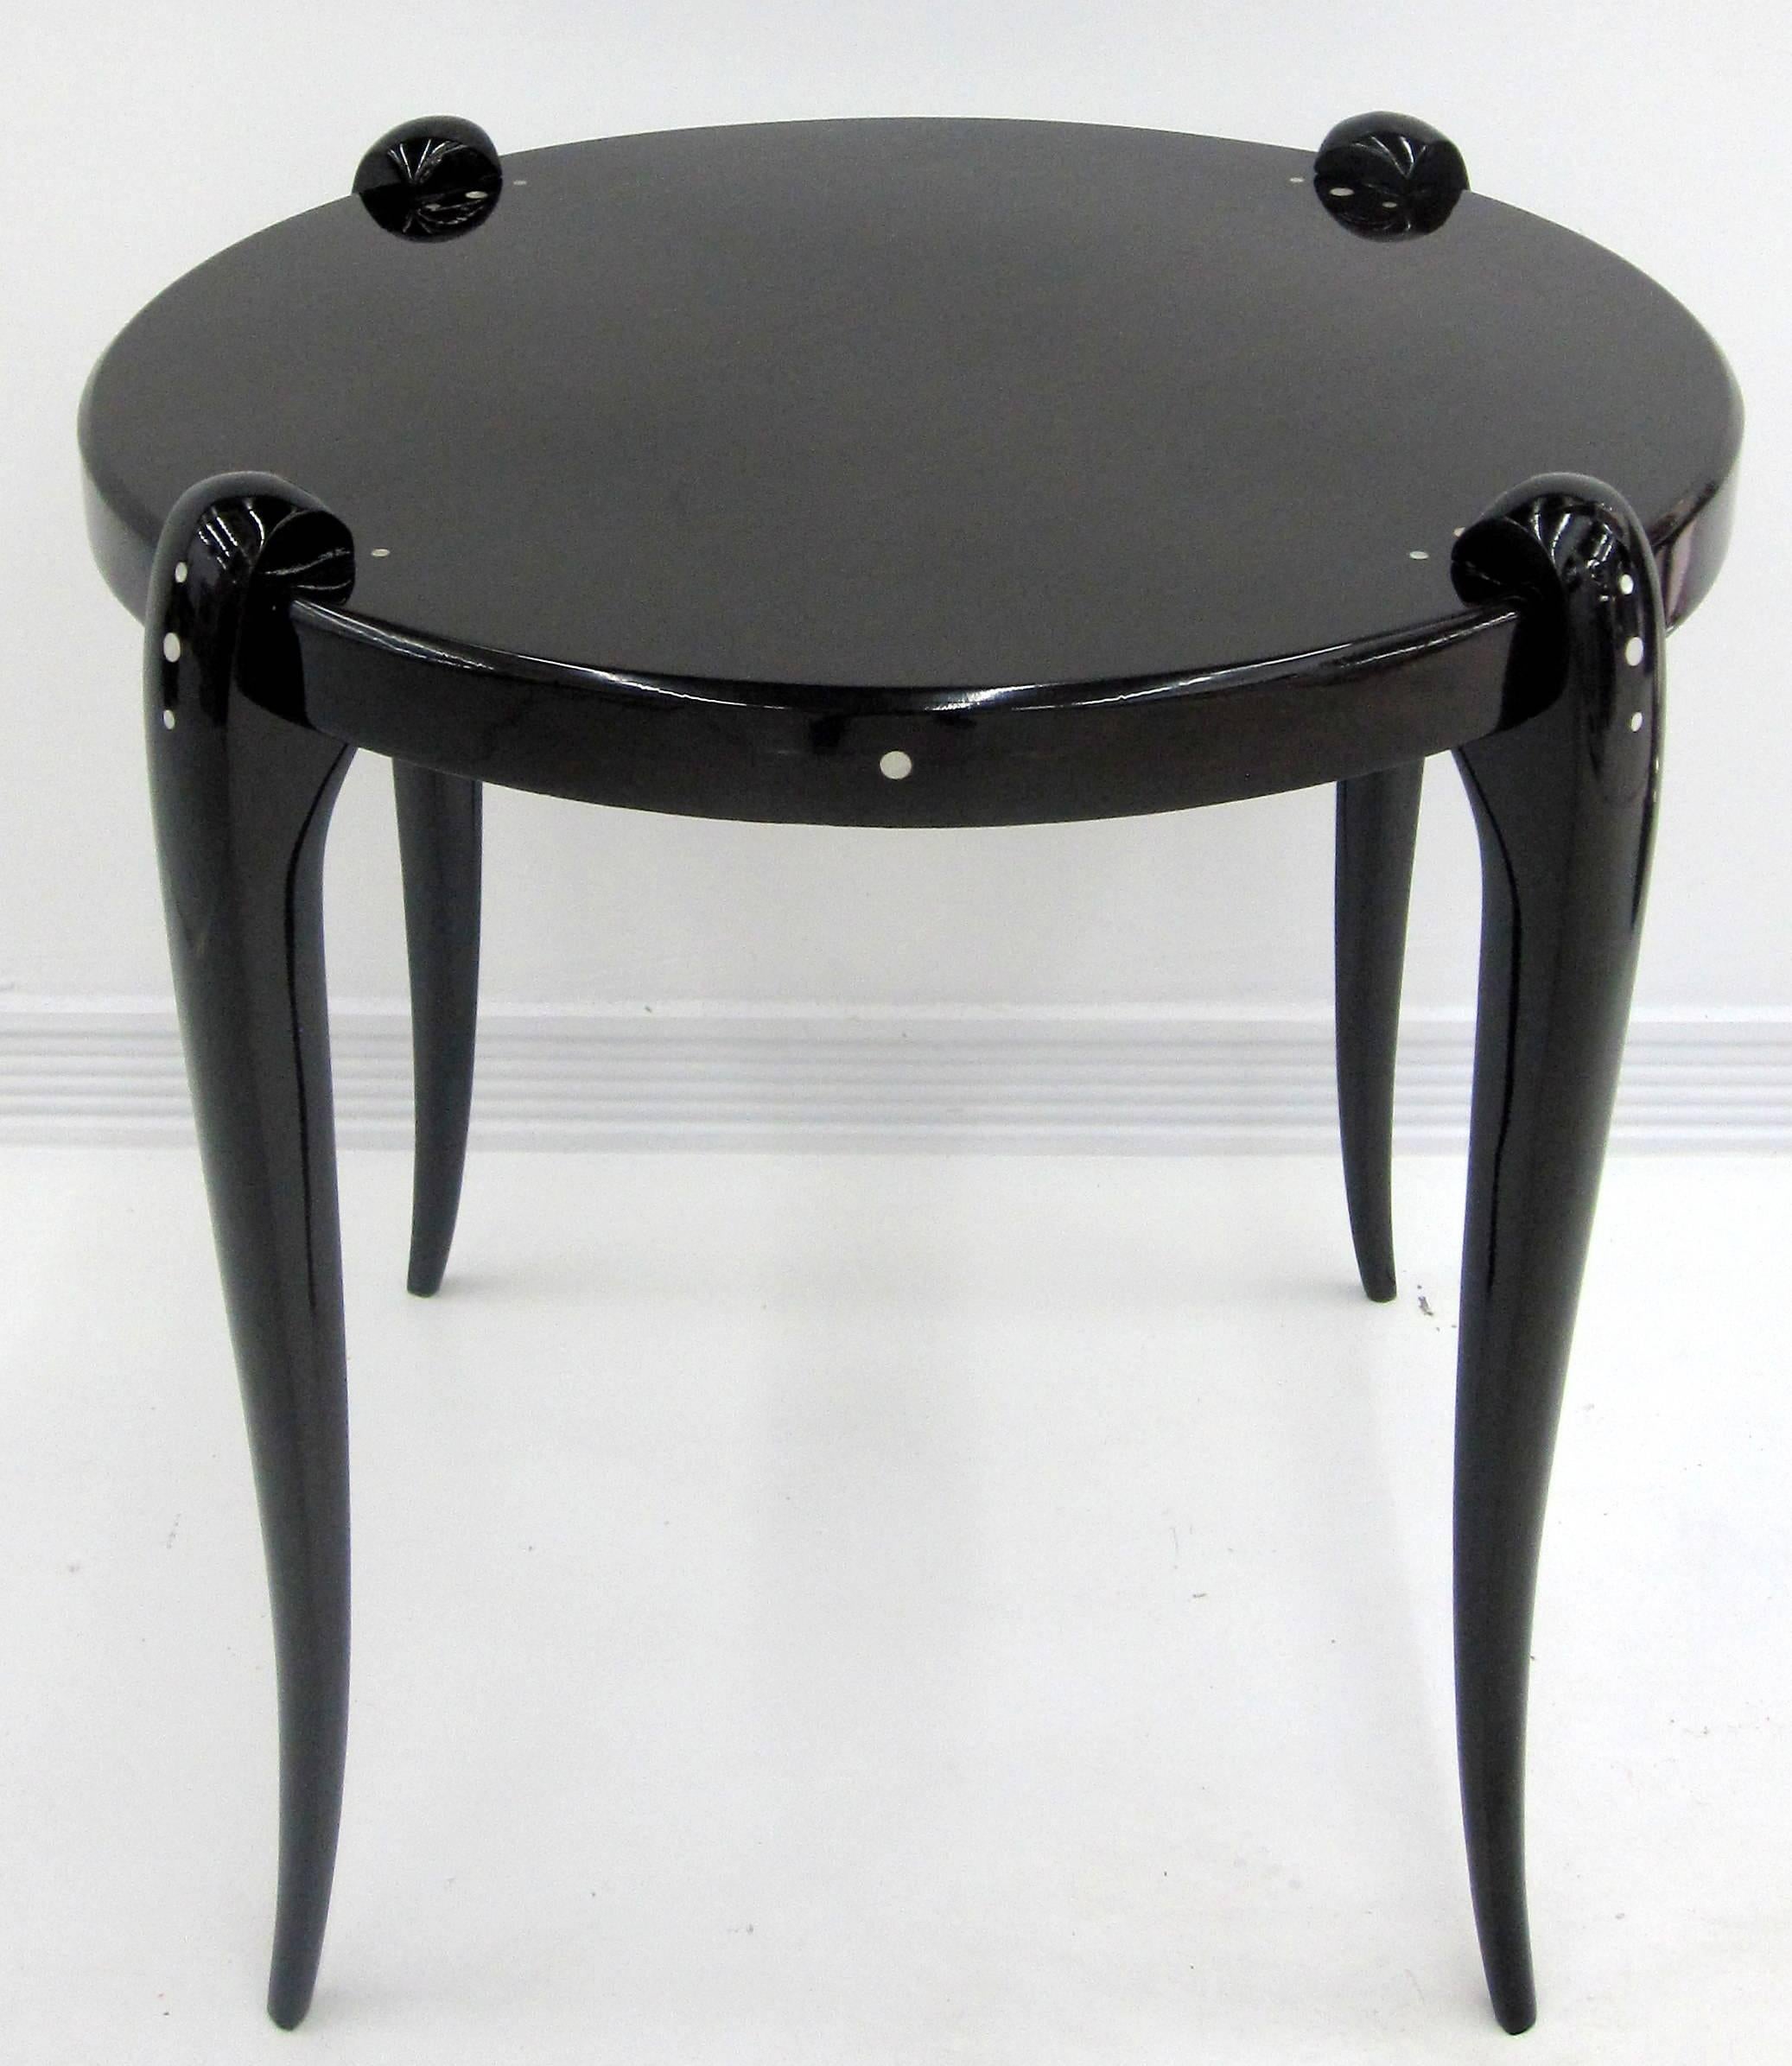 Early 20th Century  Sleek French Art Deco Table  by Jallot